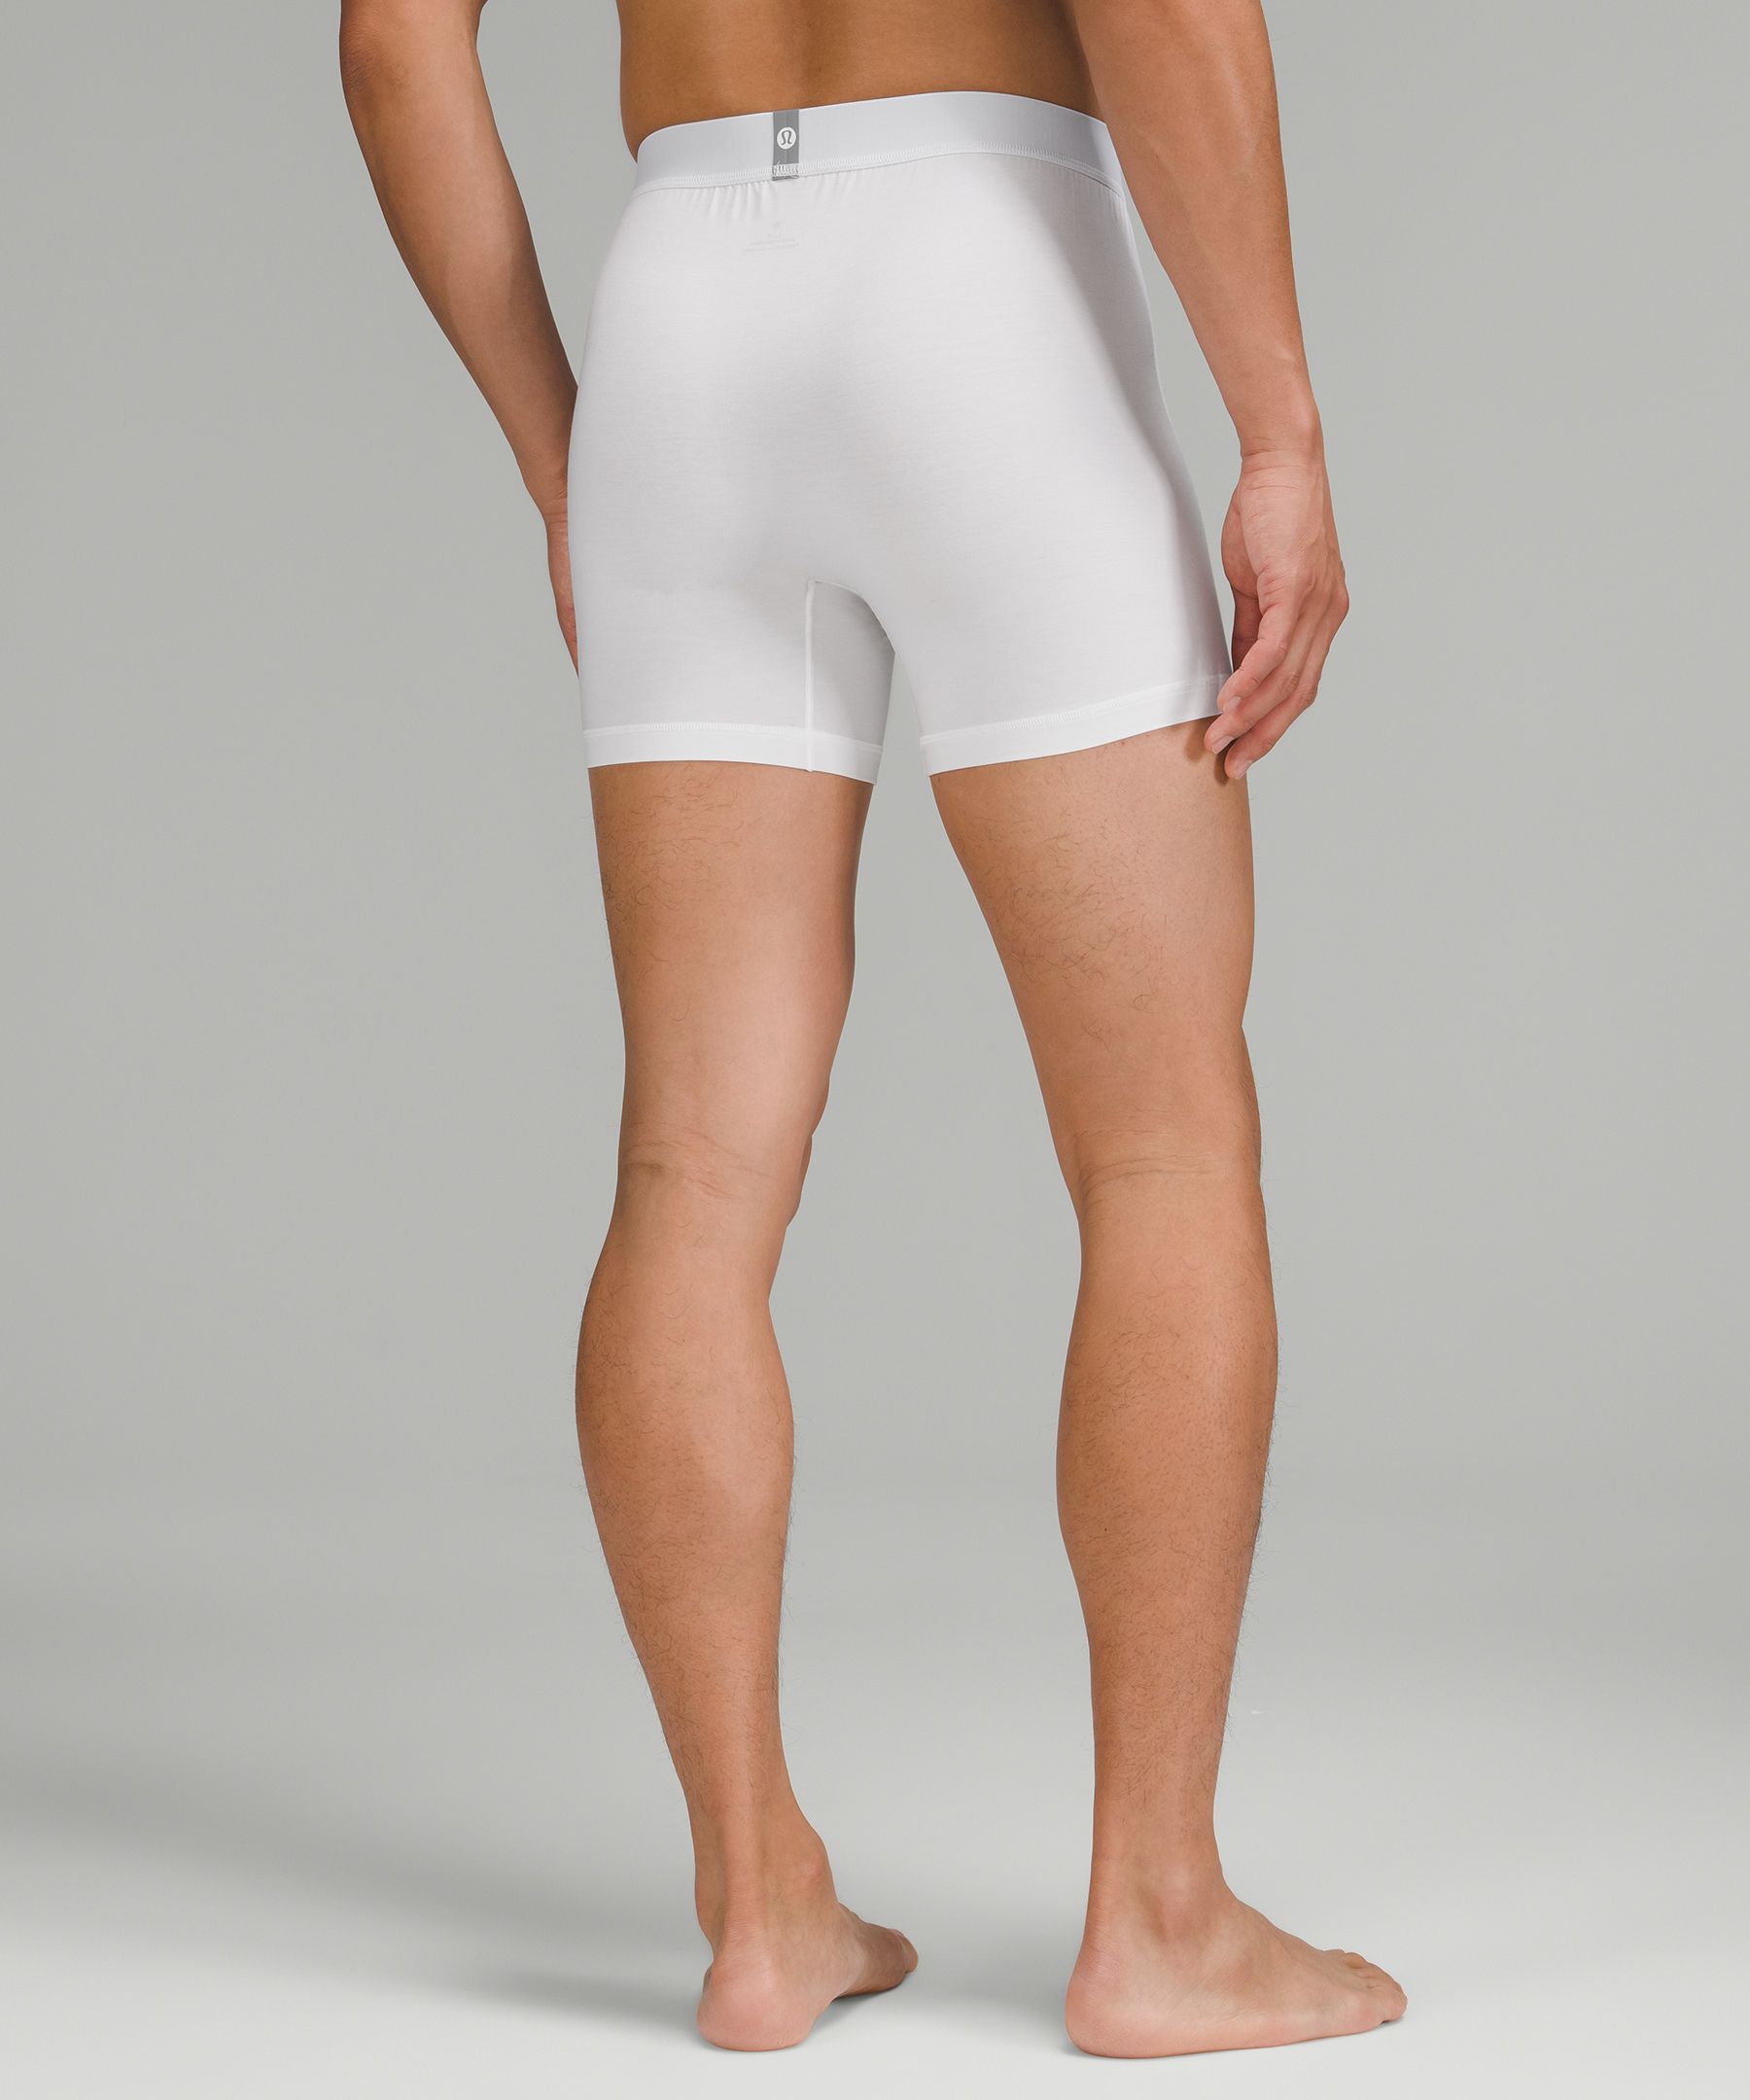 Lululemon Men's Underwear Review  International Society of Precision  Agriculture